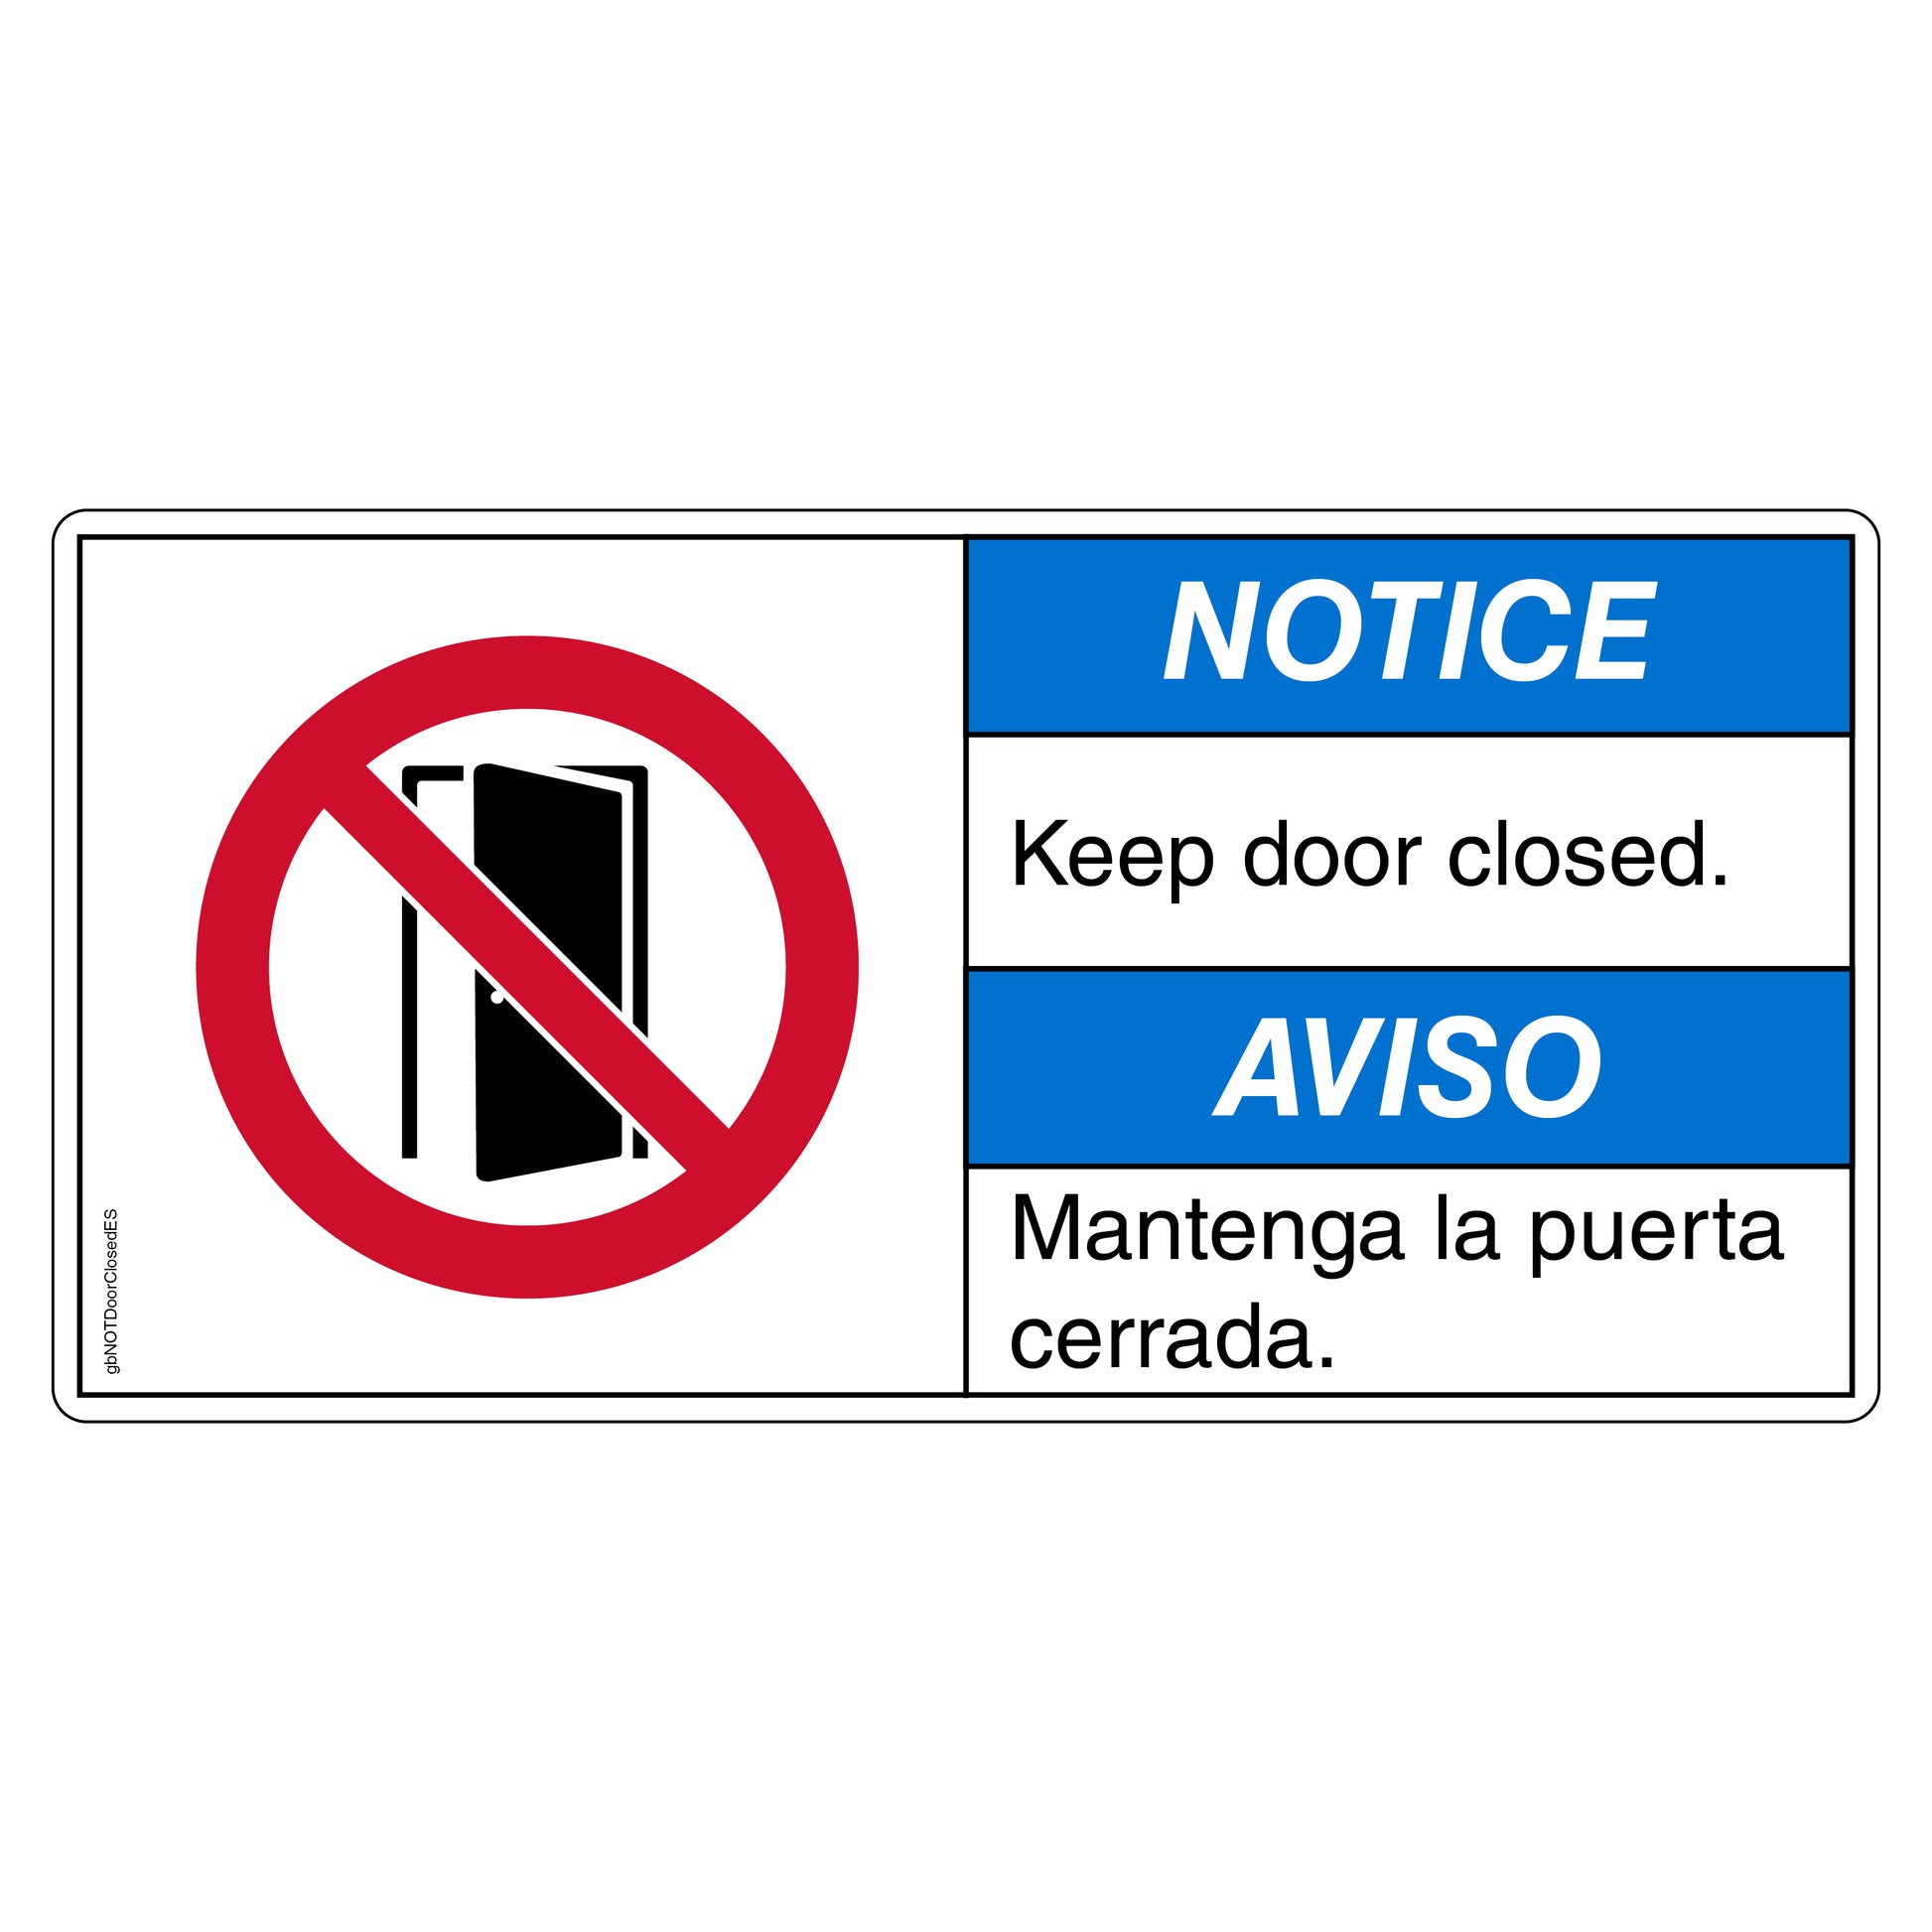 Notice Keep Door Closed Decal in English and Spanish.Notice Keep Door Closed Decal in English and Spanish.